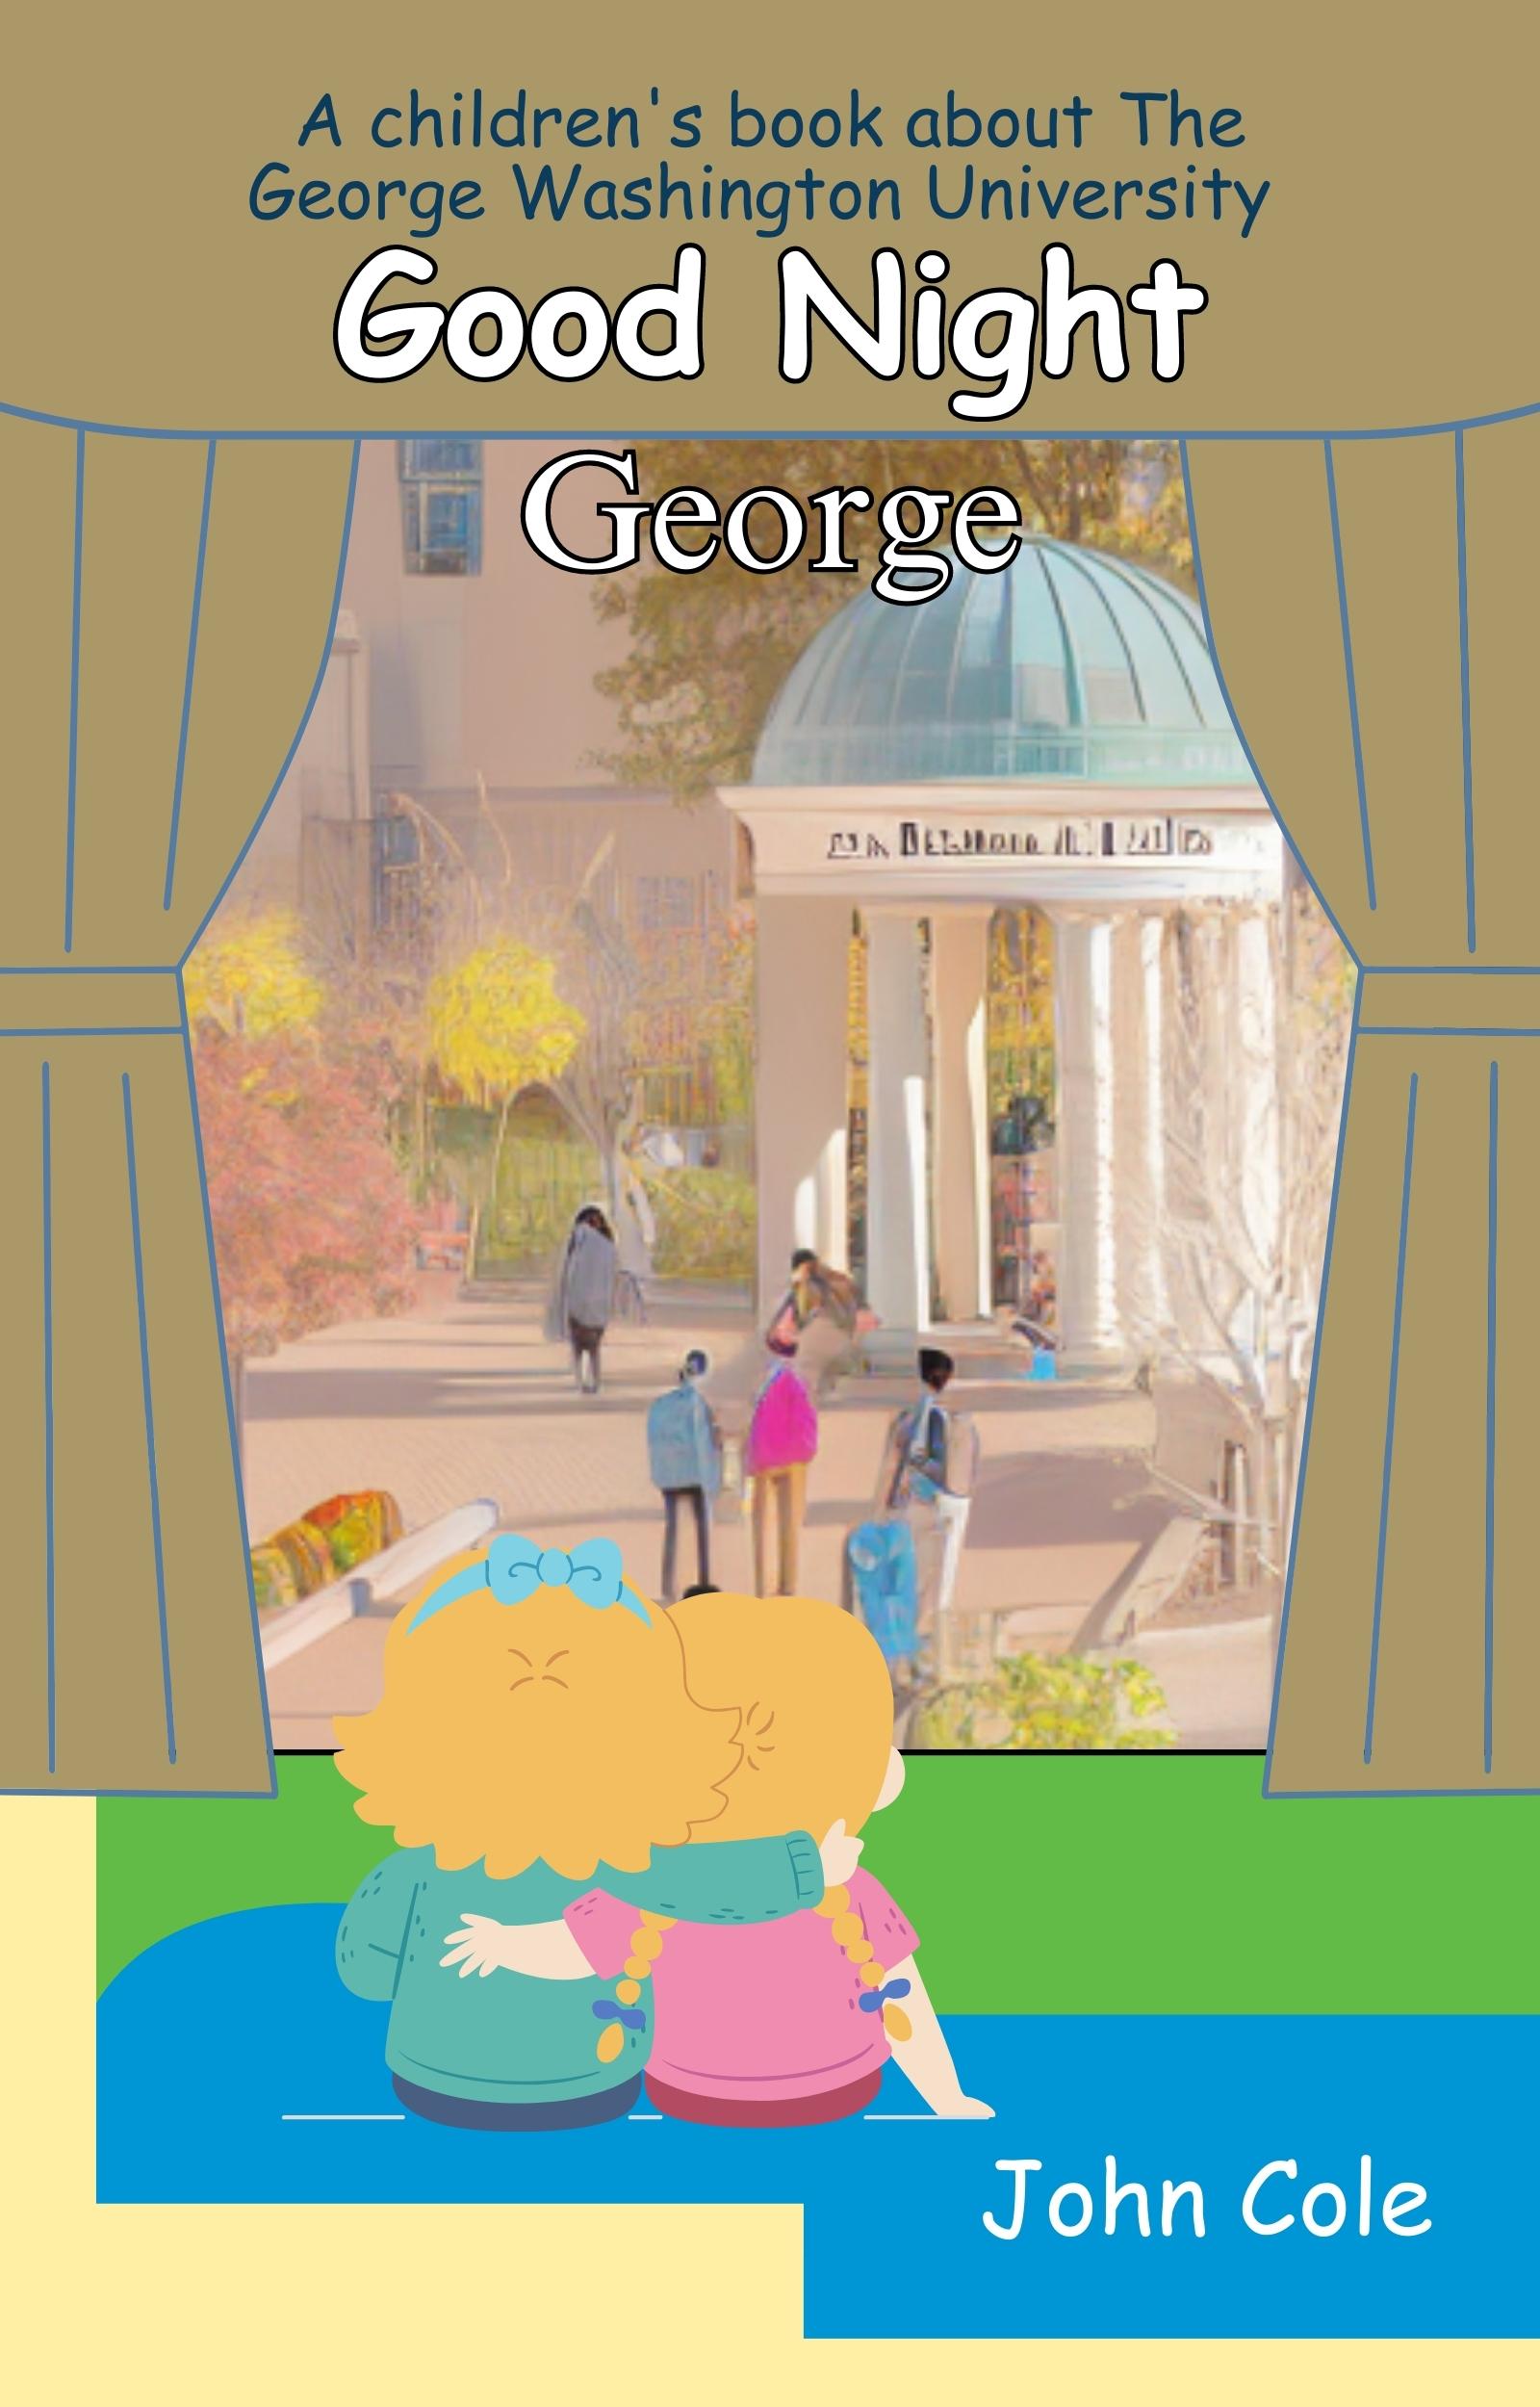 Goodnight George! Book Cover.